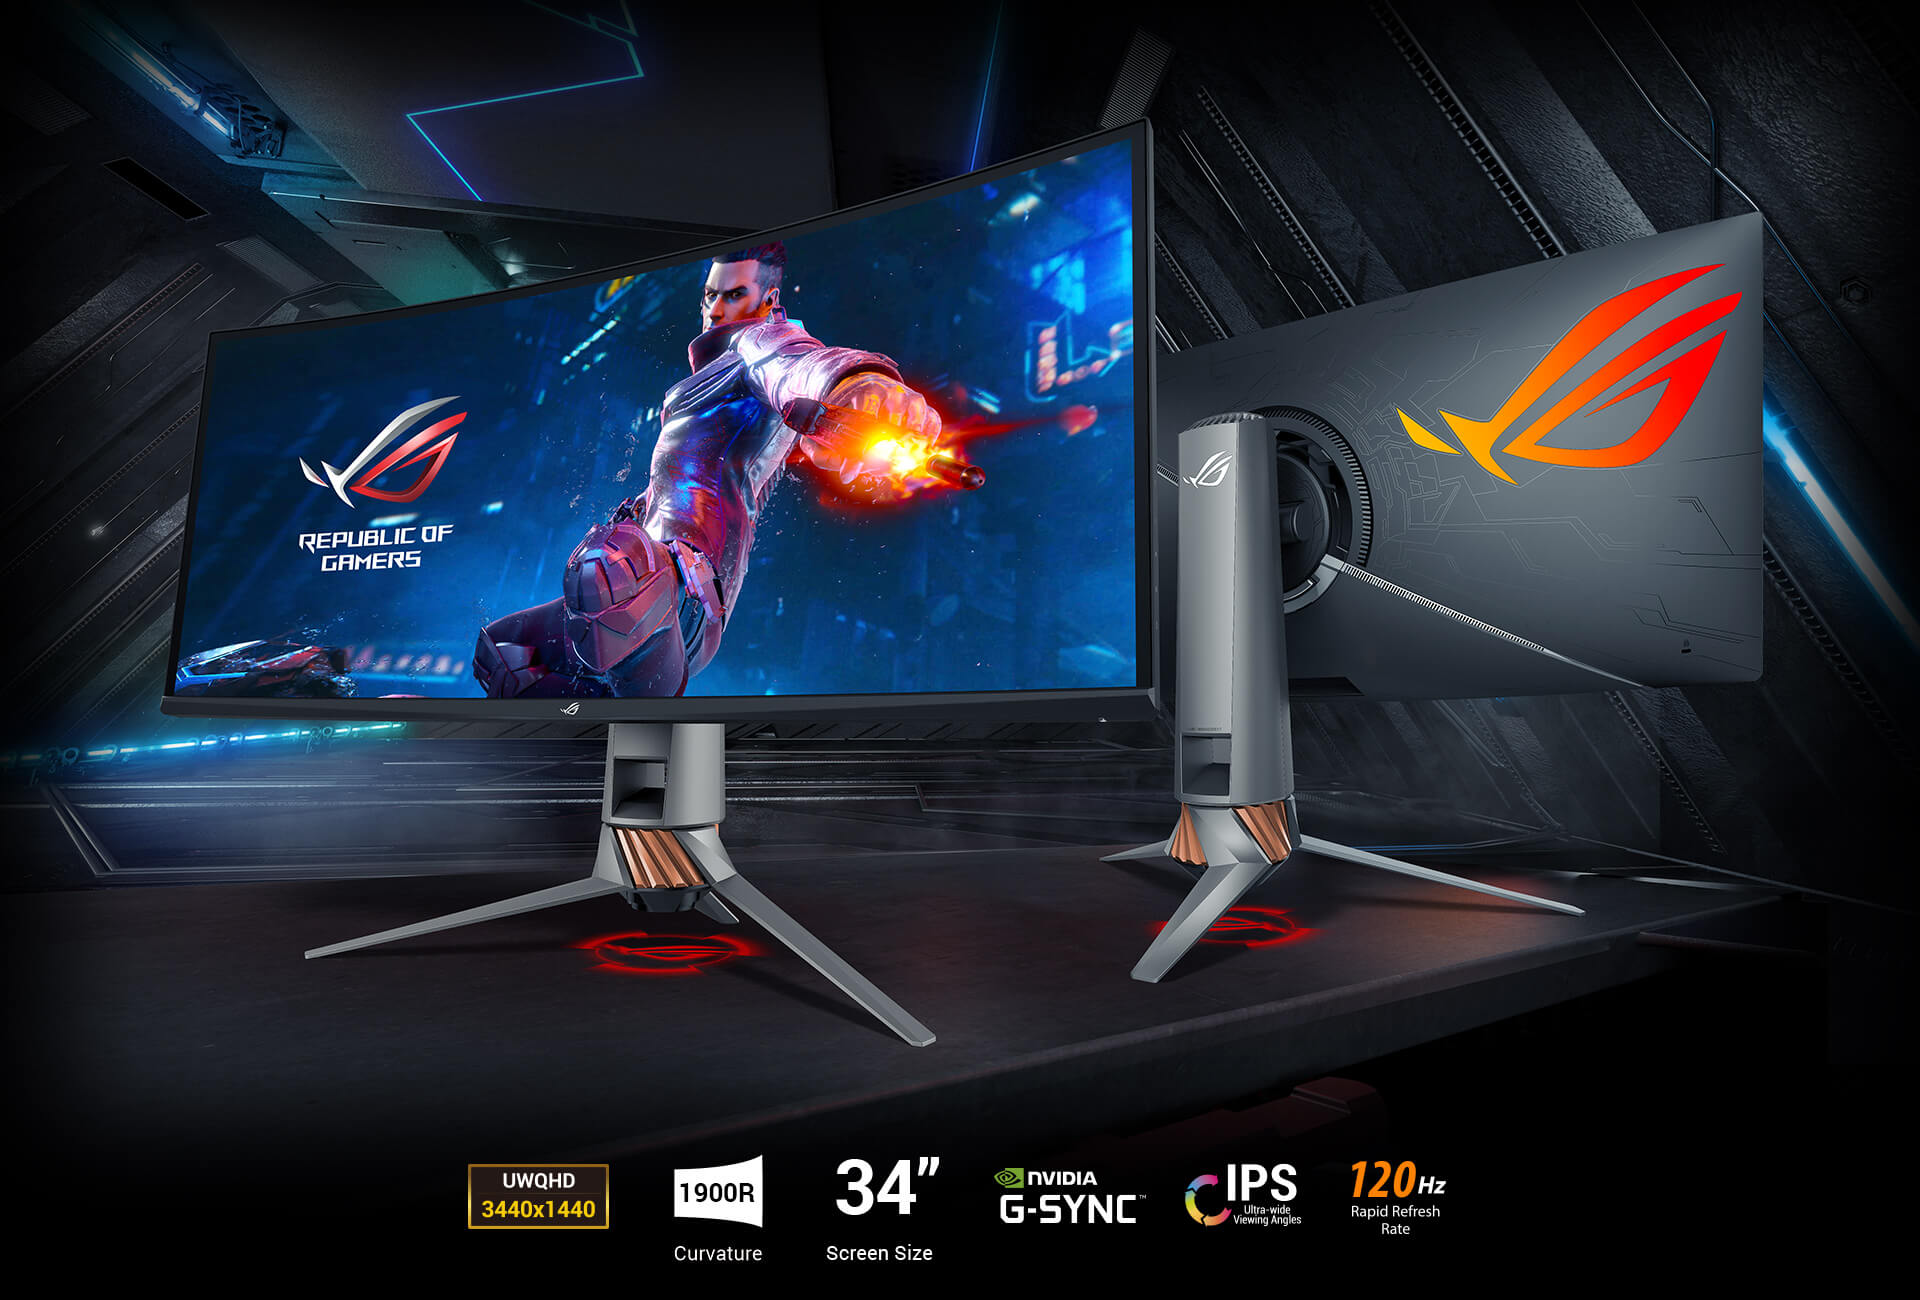 ASUS ROG announces world's first HDMI 2.1-certified 4K 120Hz gaming monitor  